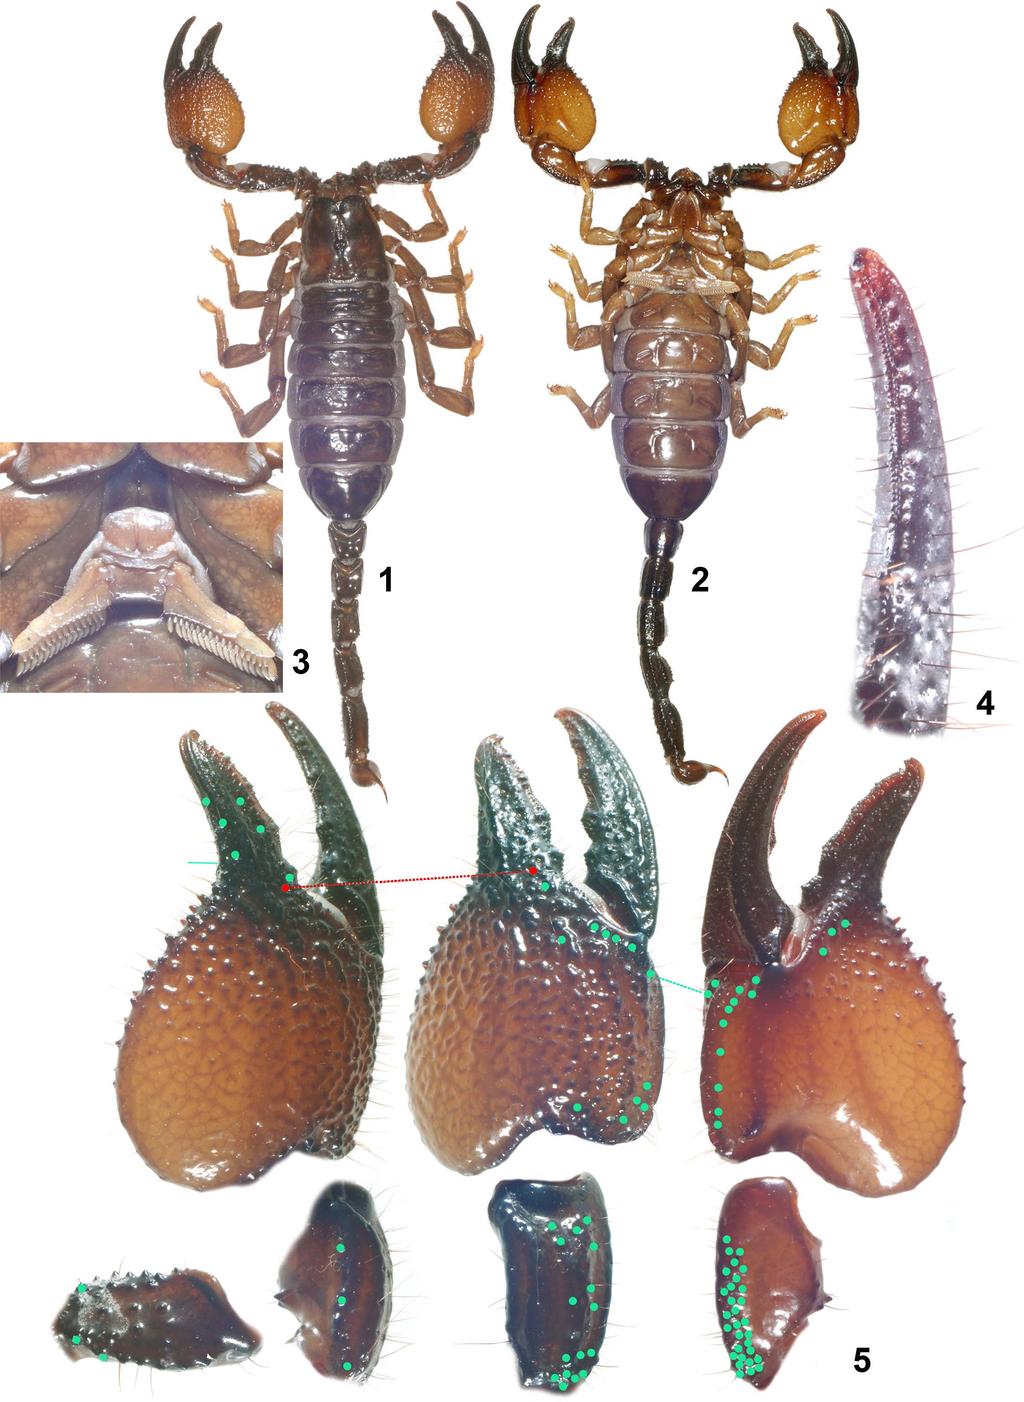 2 Euscorpius 2011, No. 129 Figures 1 5: Pandinus mazuchi sp. n., (92.5 mm) holotype. 1 2. dorsal and ventral views. 3. Pectinal area. 4.